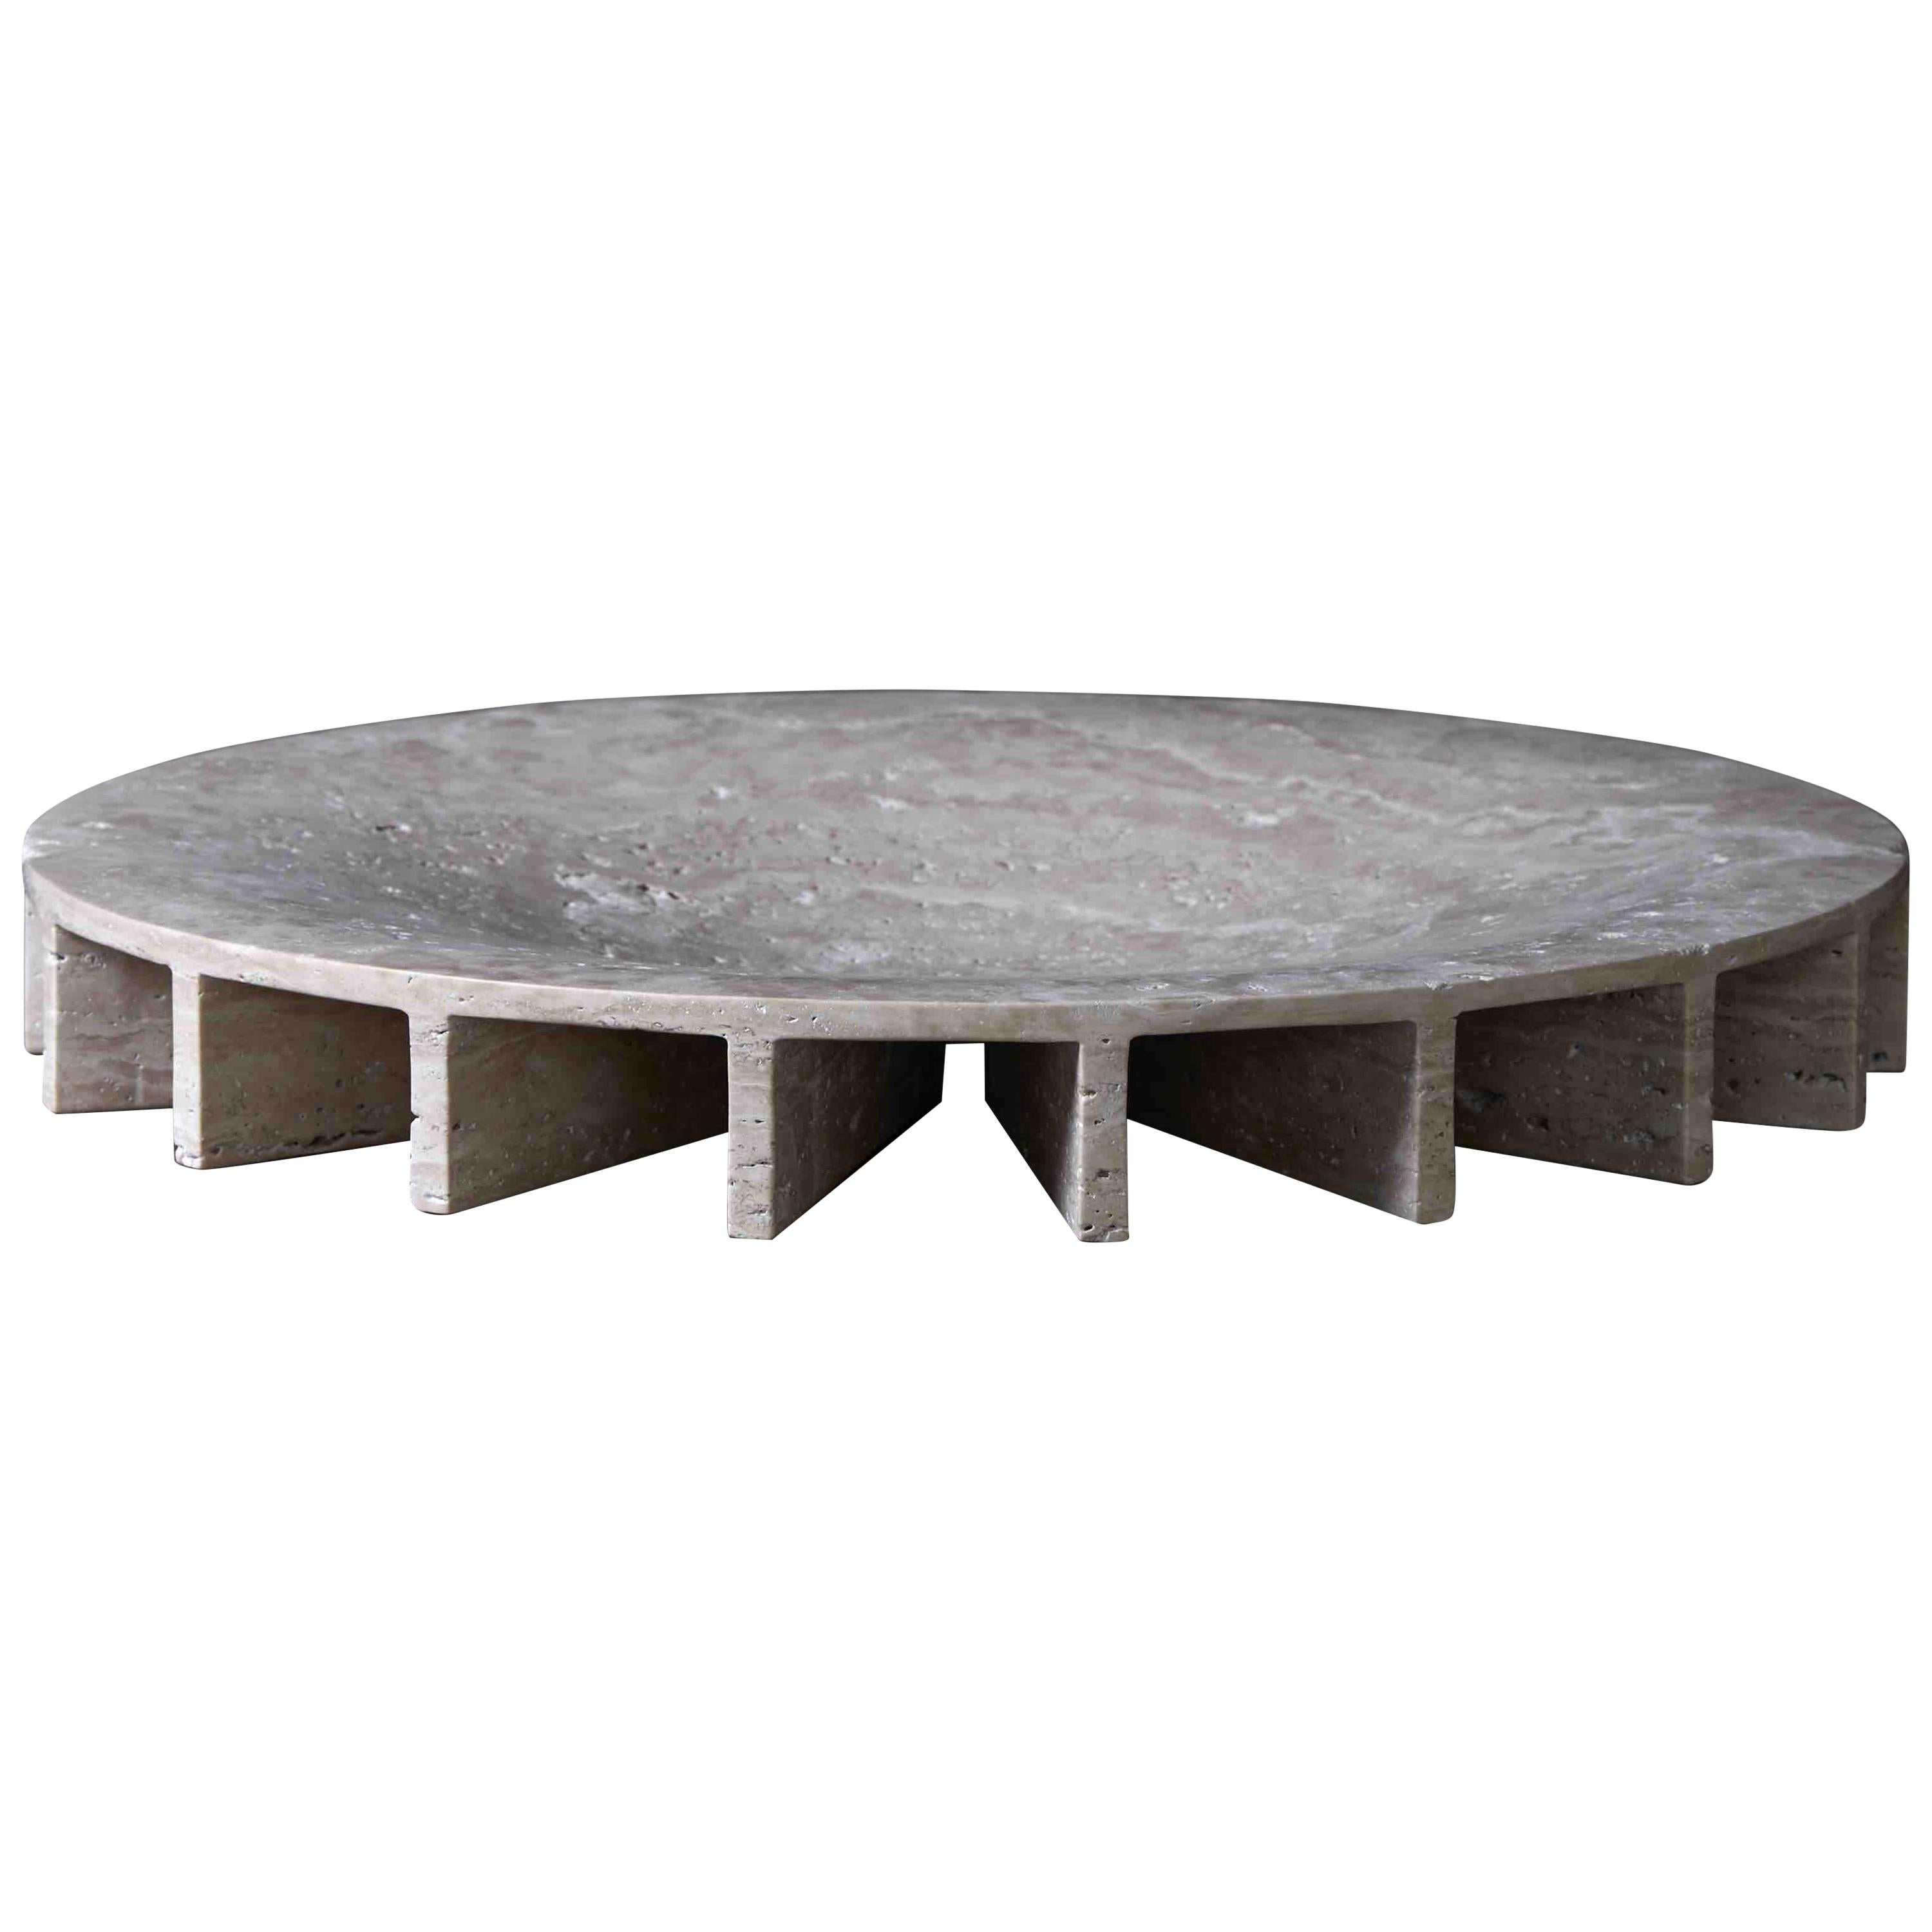 Large Travertine 'Ray' Bowl By Collection Particulière